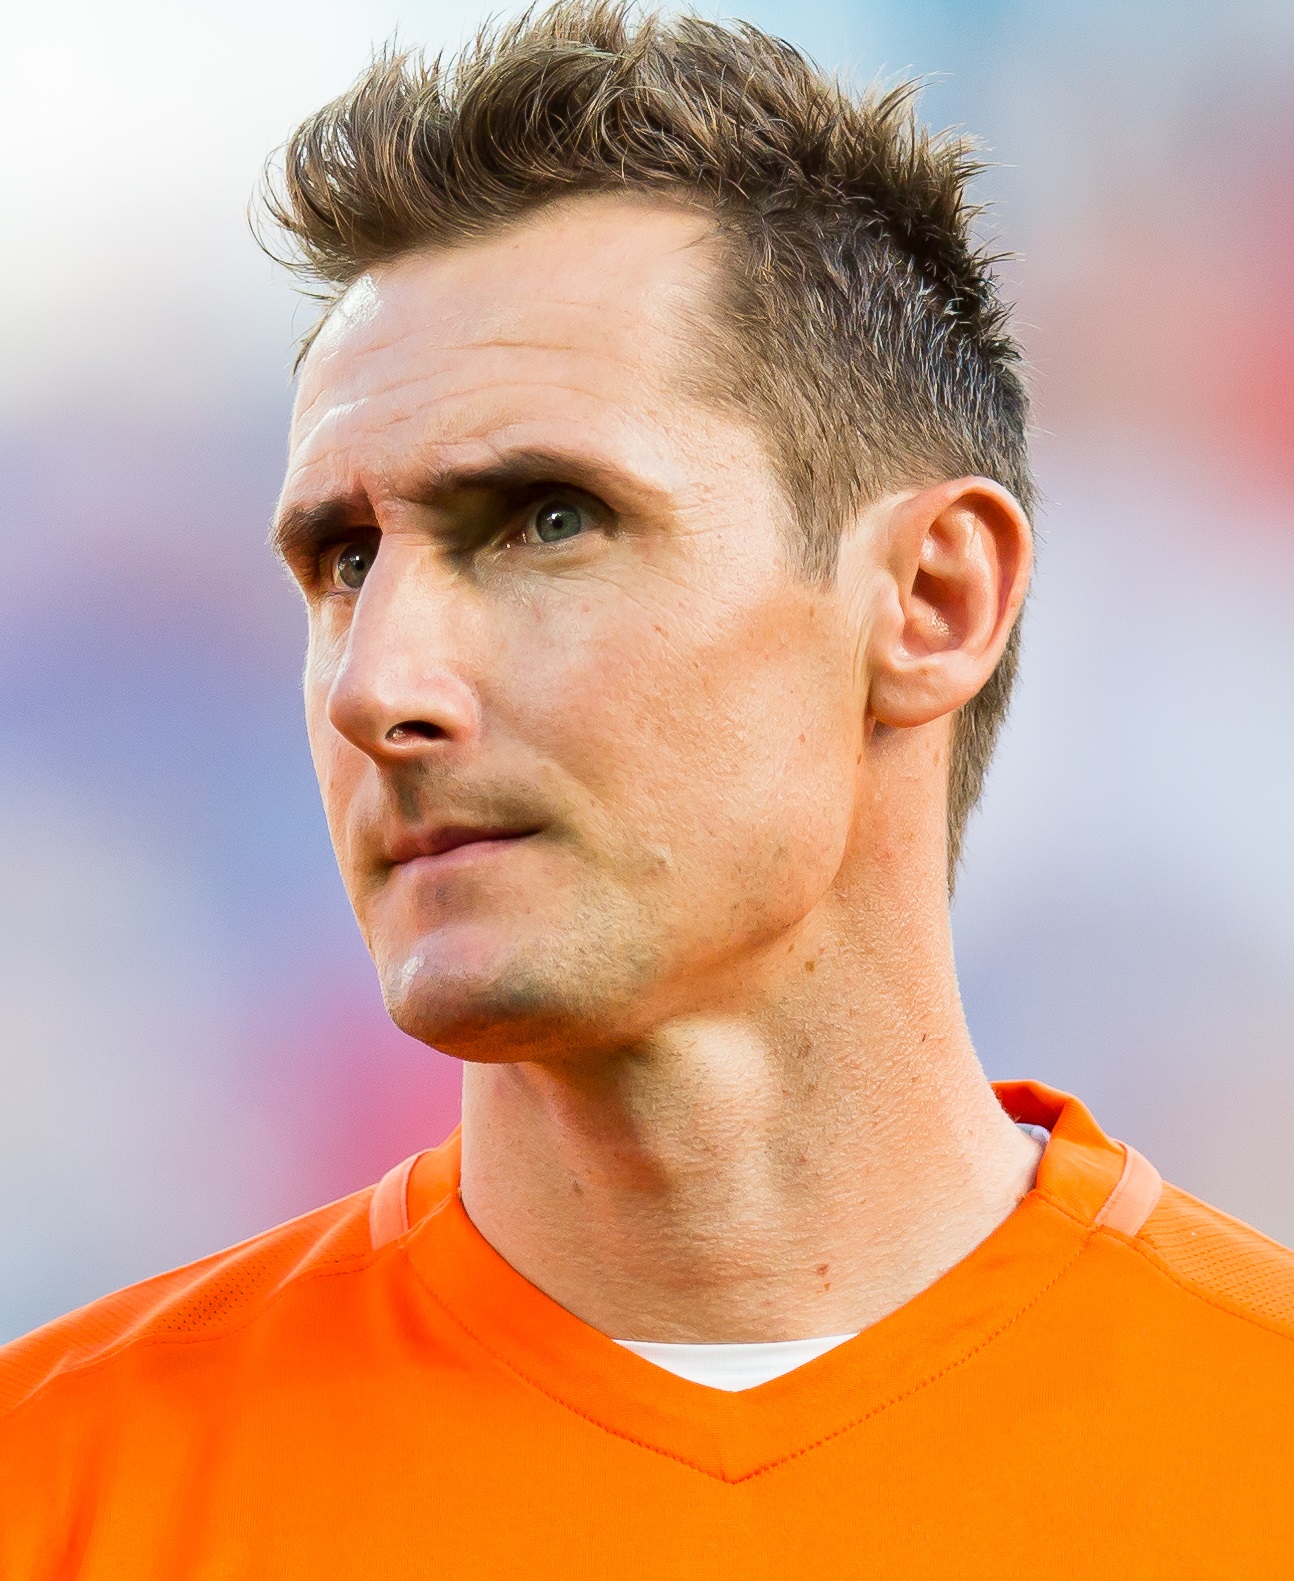 Klose declares himself once again fit, reveals he declined offer to join  Flick at national team